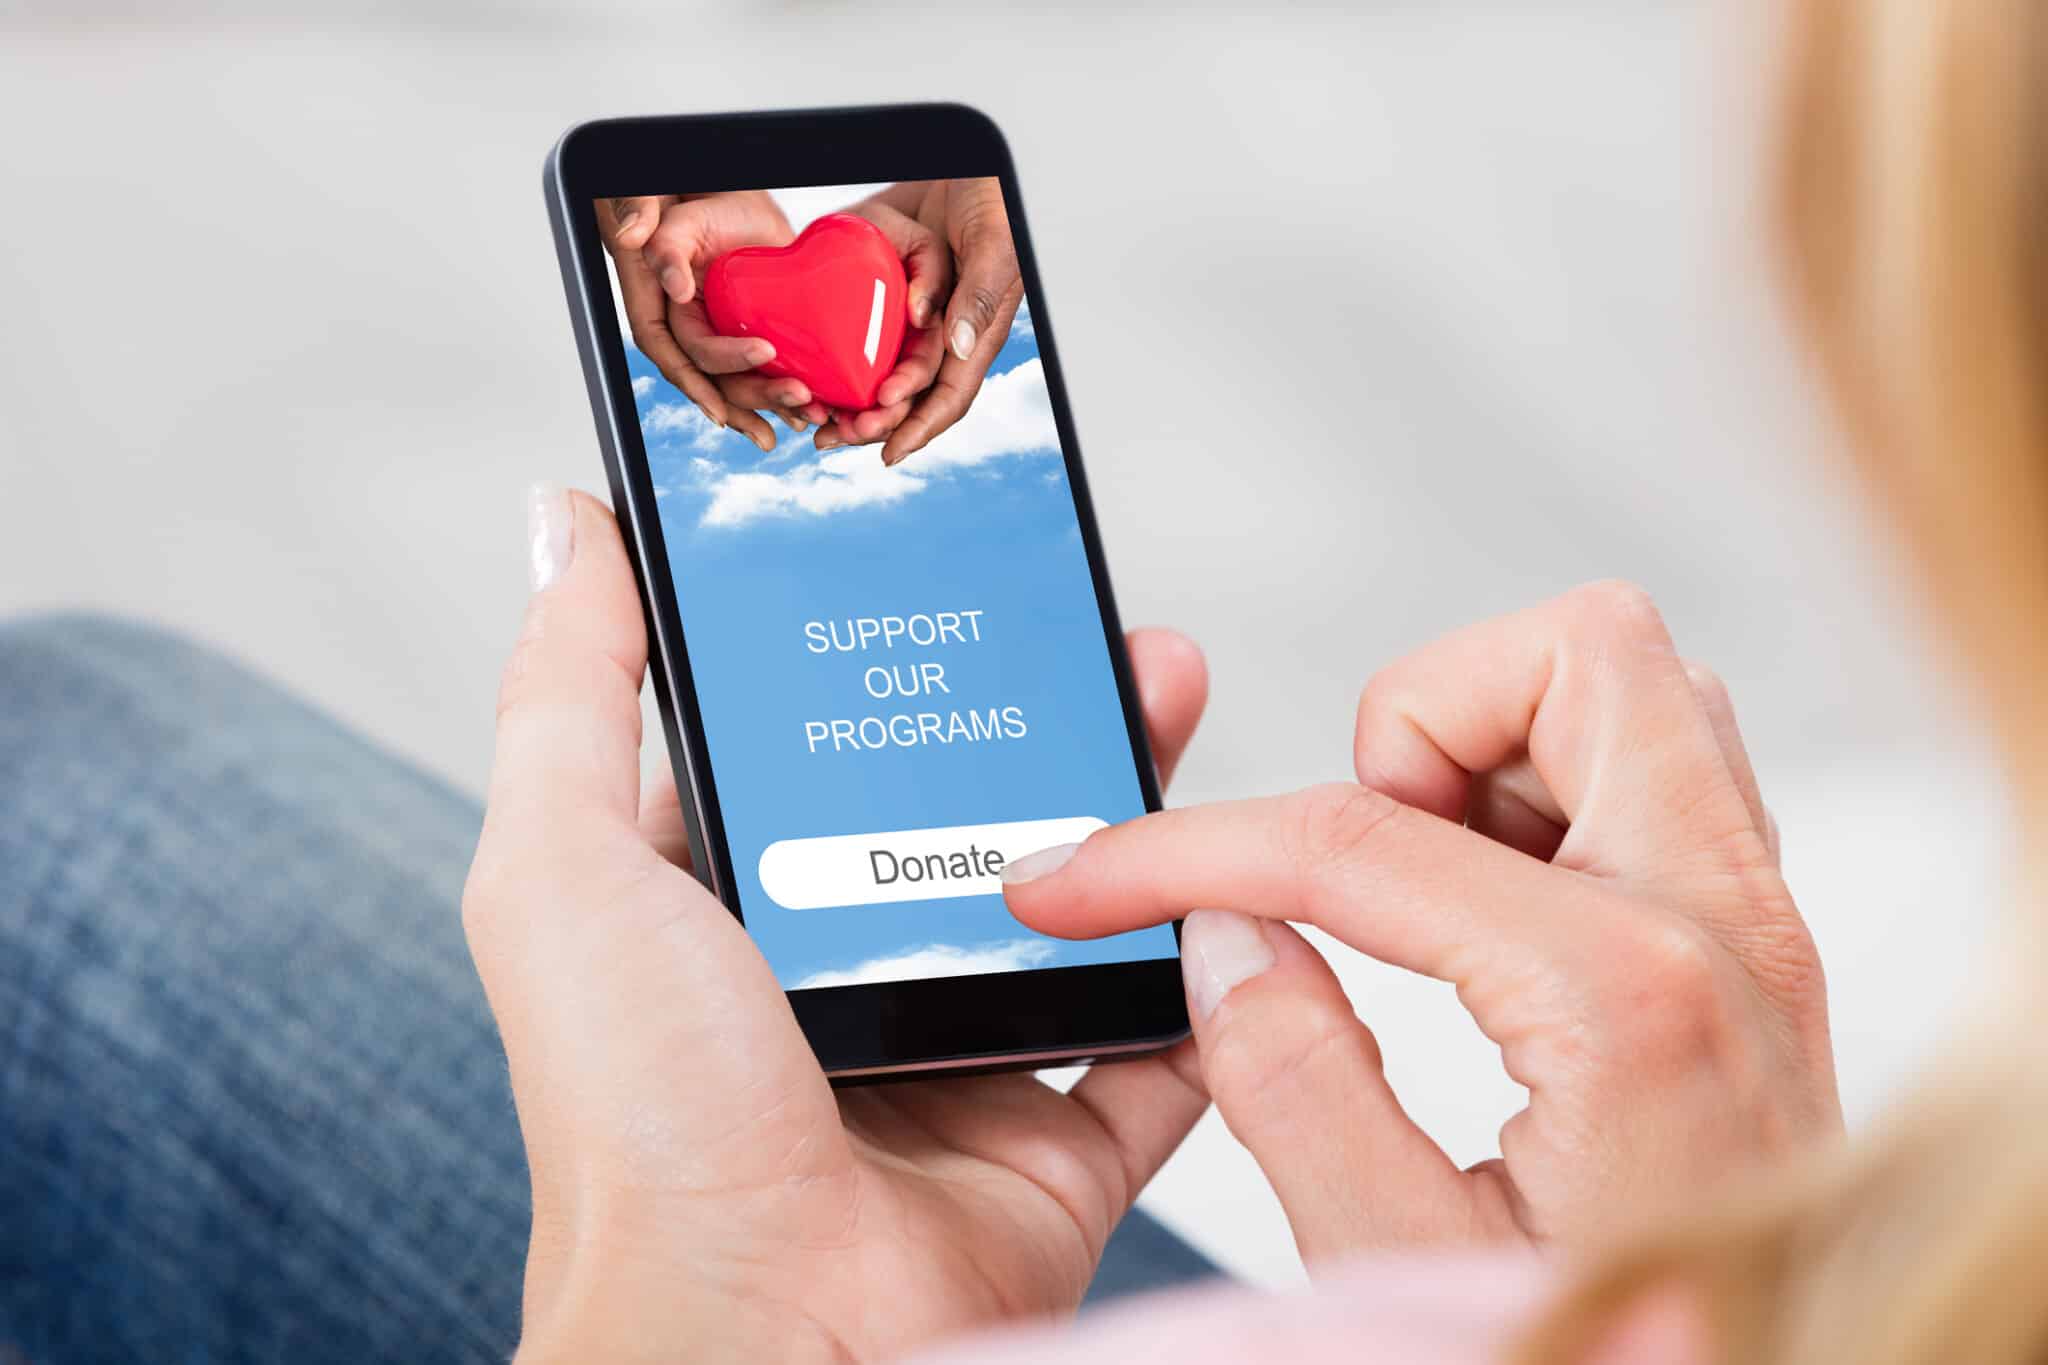 Persona holds mobile phone in hand, scrolling through donation webpage.